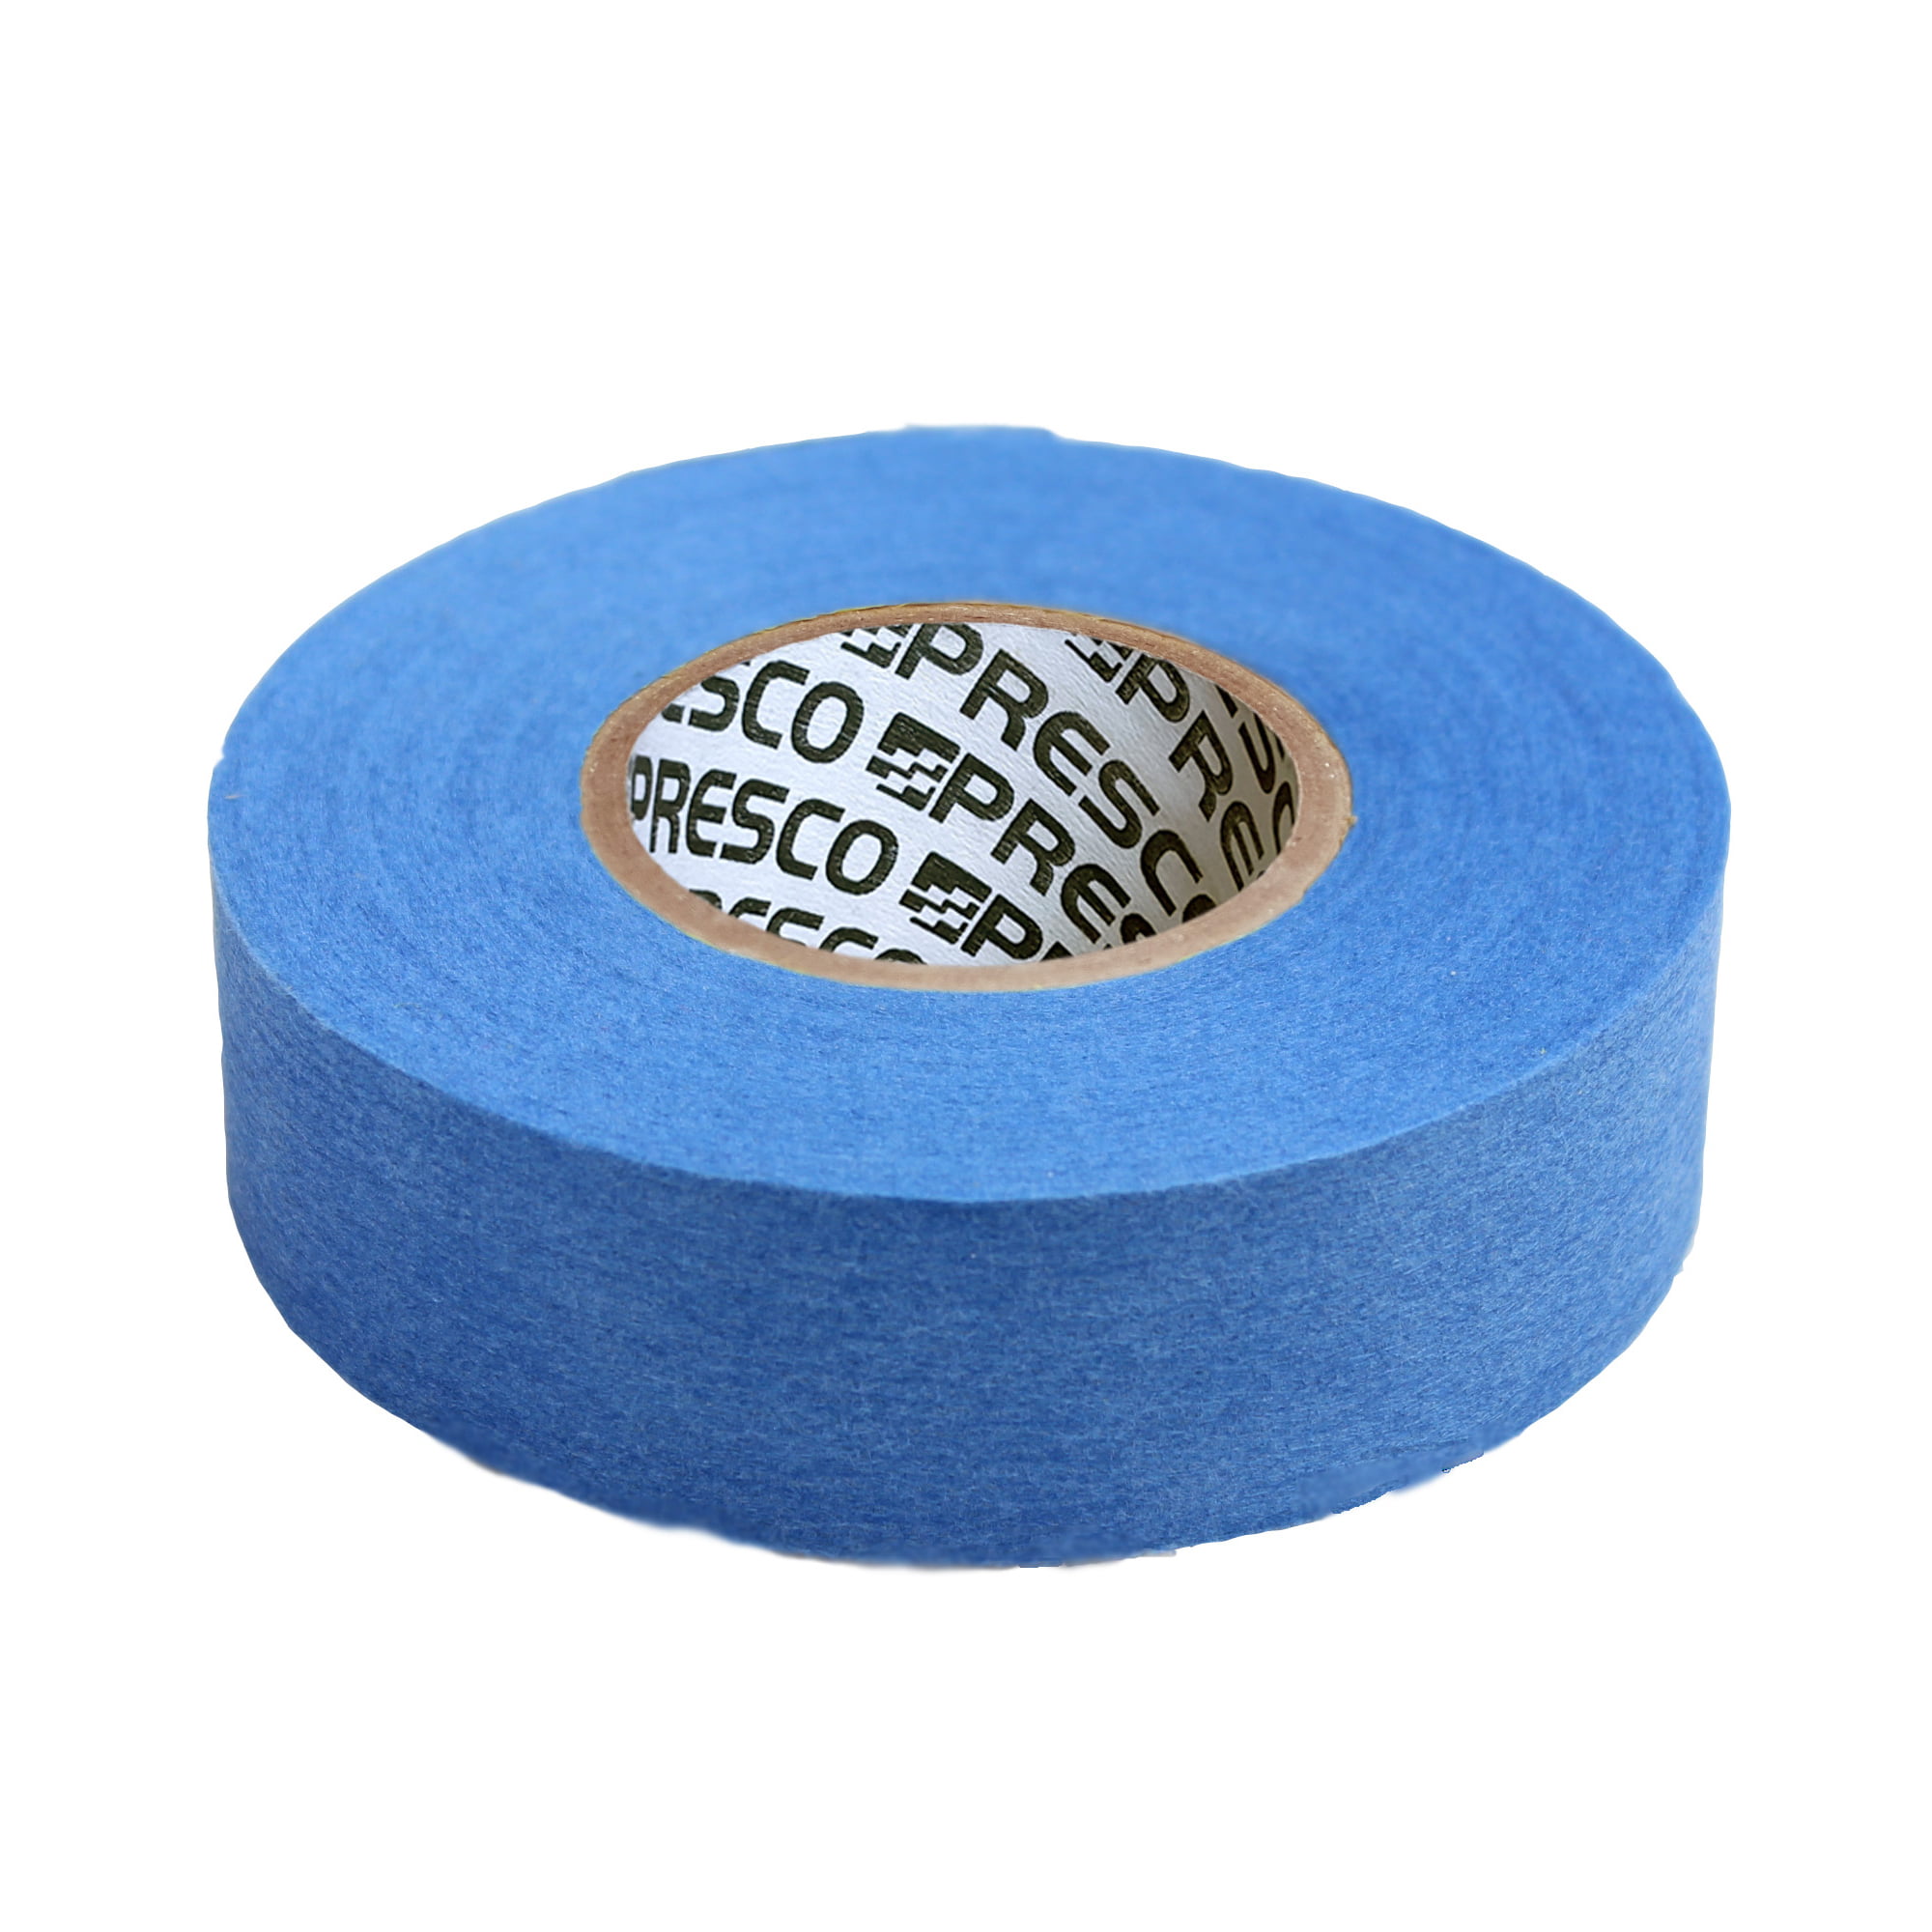 4 ROLL'S OF BLUE MUTUAL BIODEGRADABLE FLAGGING TAPE 1” X 100' FREE SHIPPING 